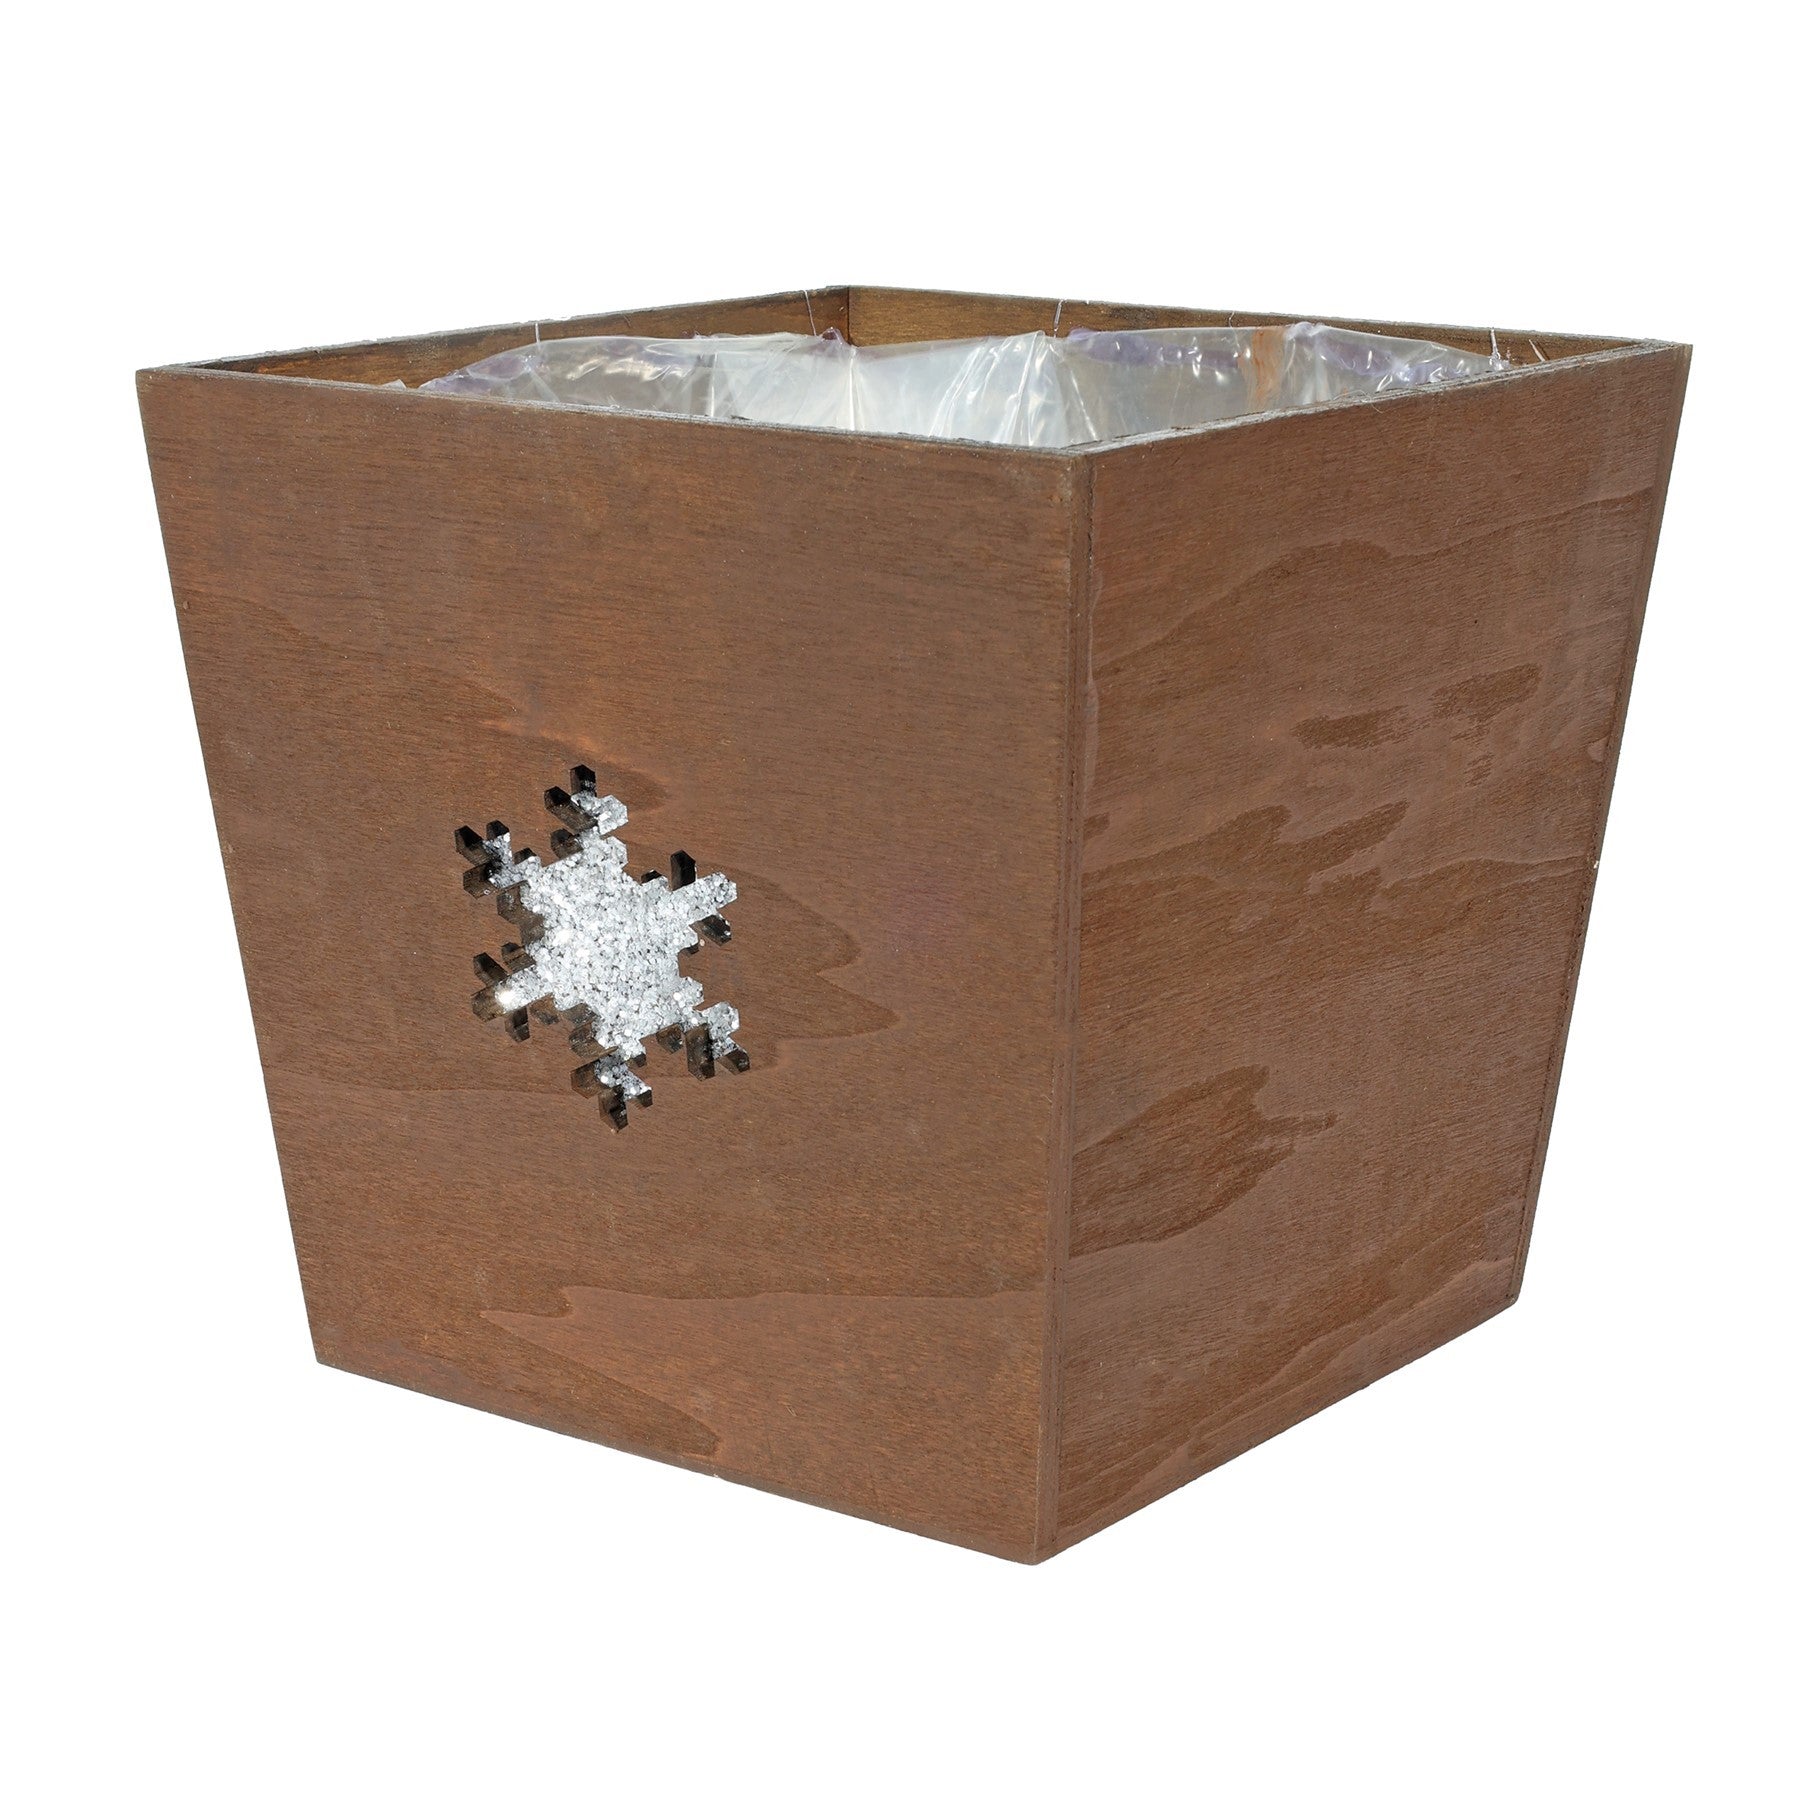 View Square Plywood Planter information